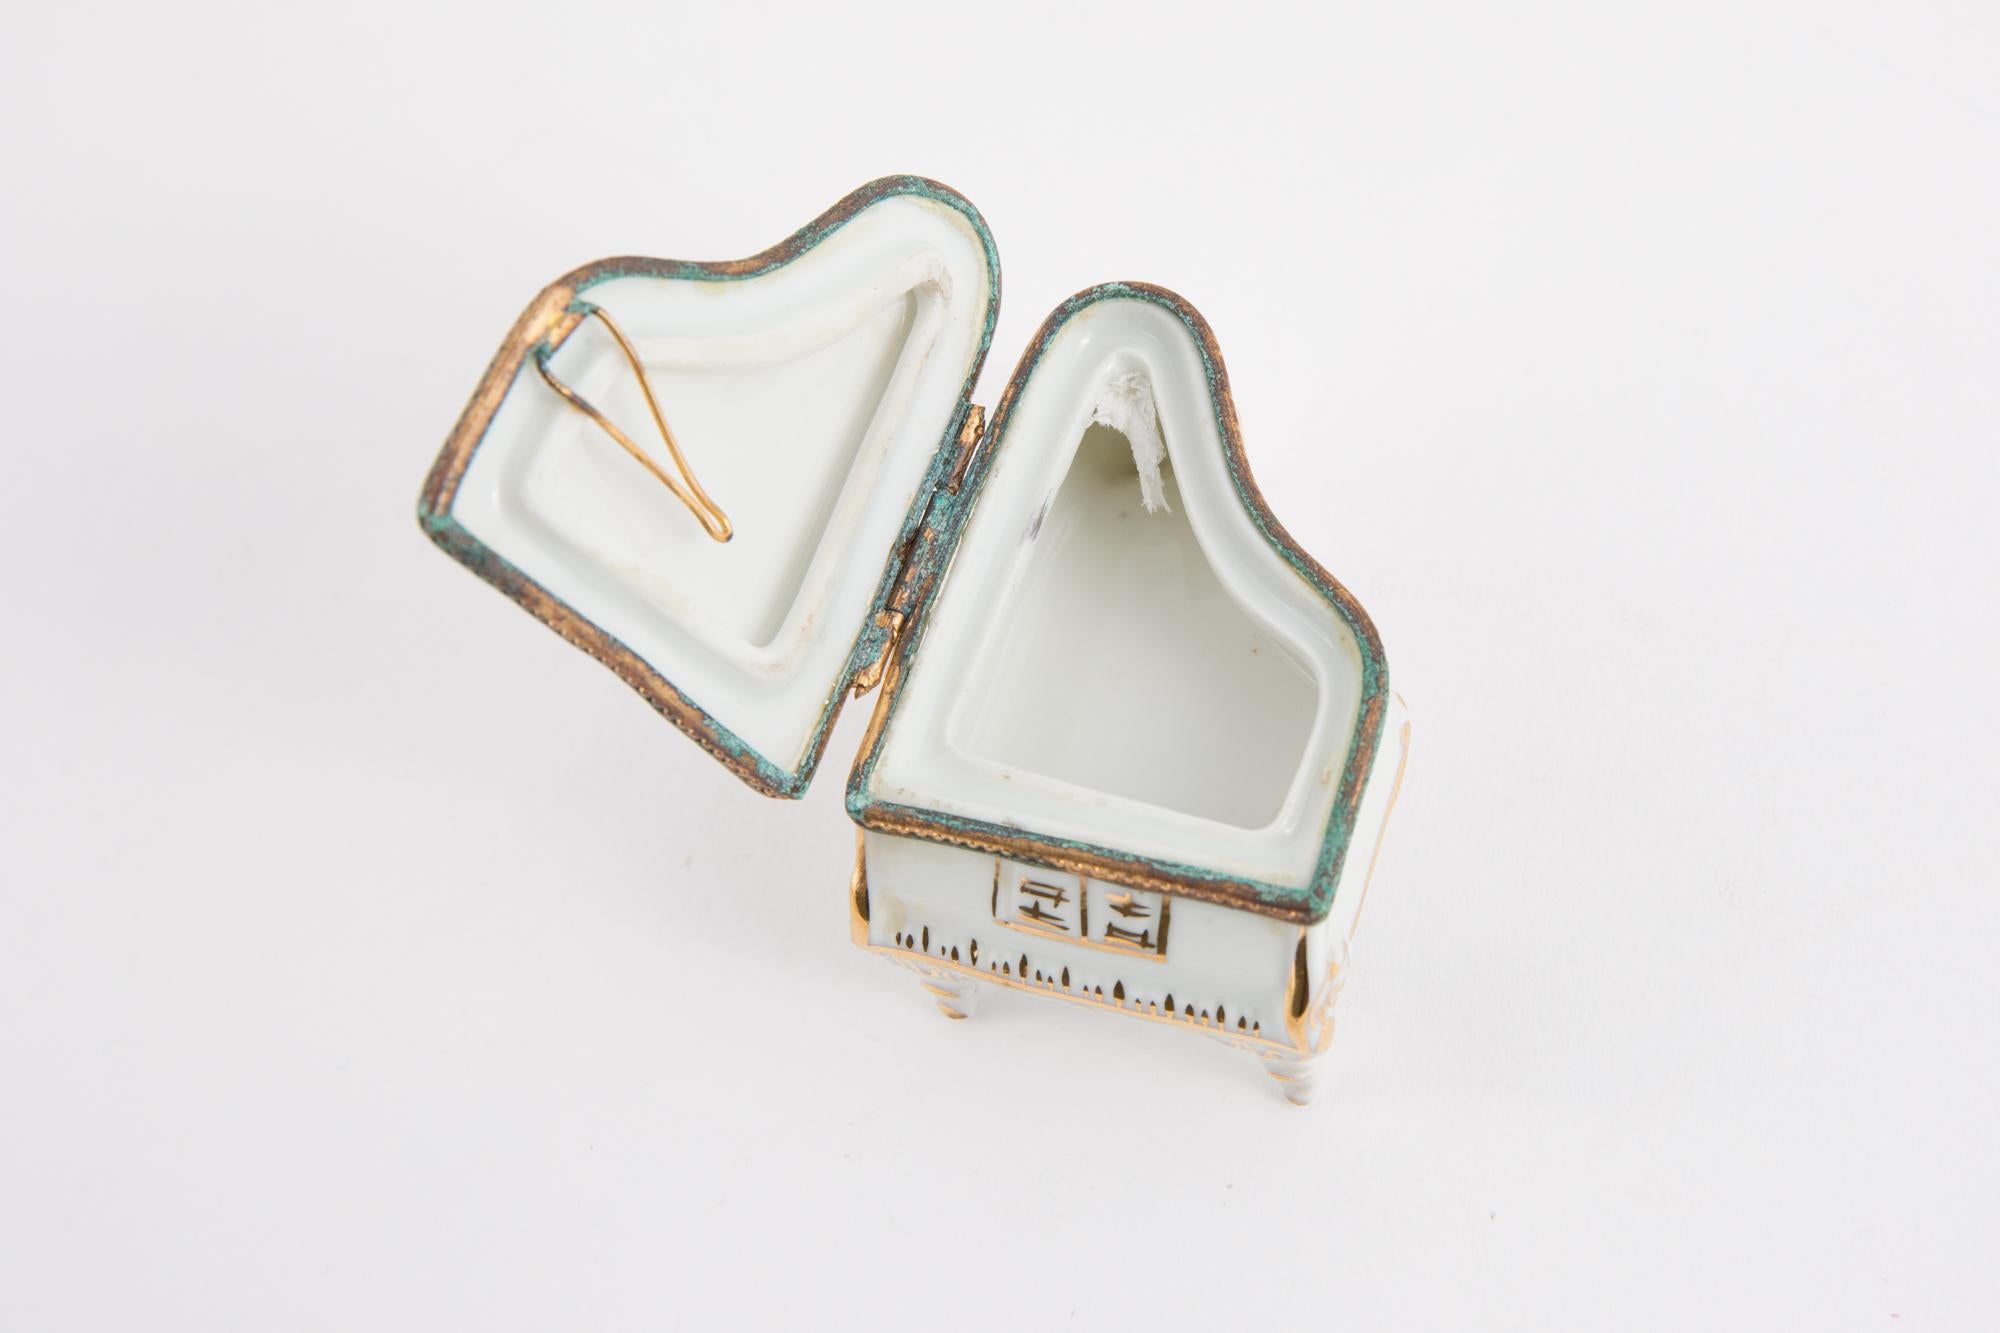 Limoges Singer porcelain piano shaped pill box featuring a gold metal frame with a gallant stage decor, a metallic gold tone hook to keep it open, a under stamp.
In good vintage condition. Made in France. 
Height Closed 1.5in. (4cm)
Maxi Width